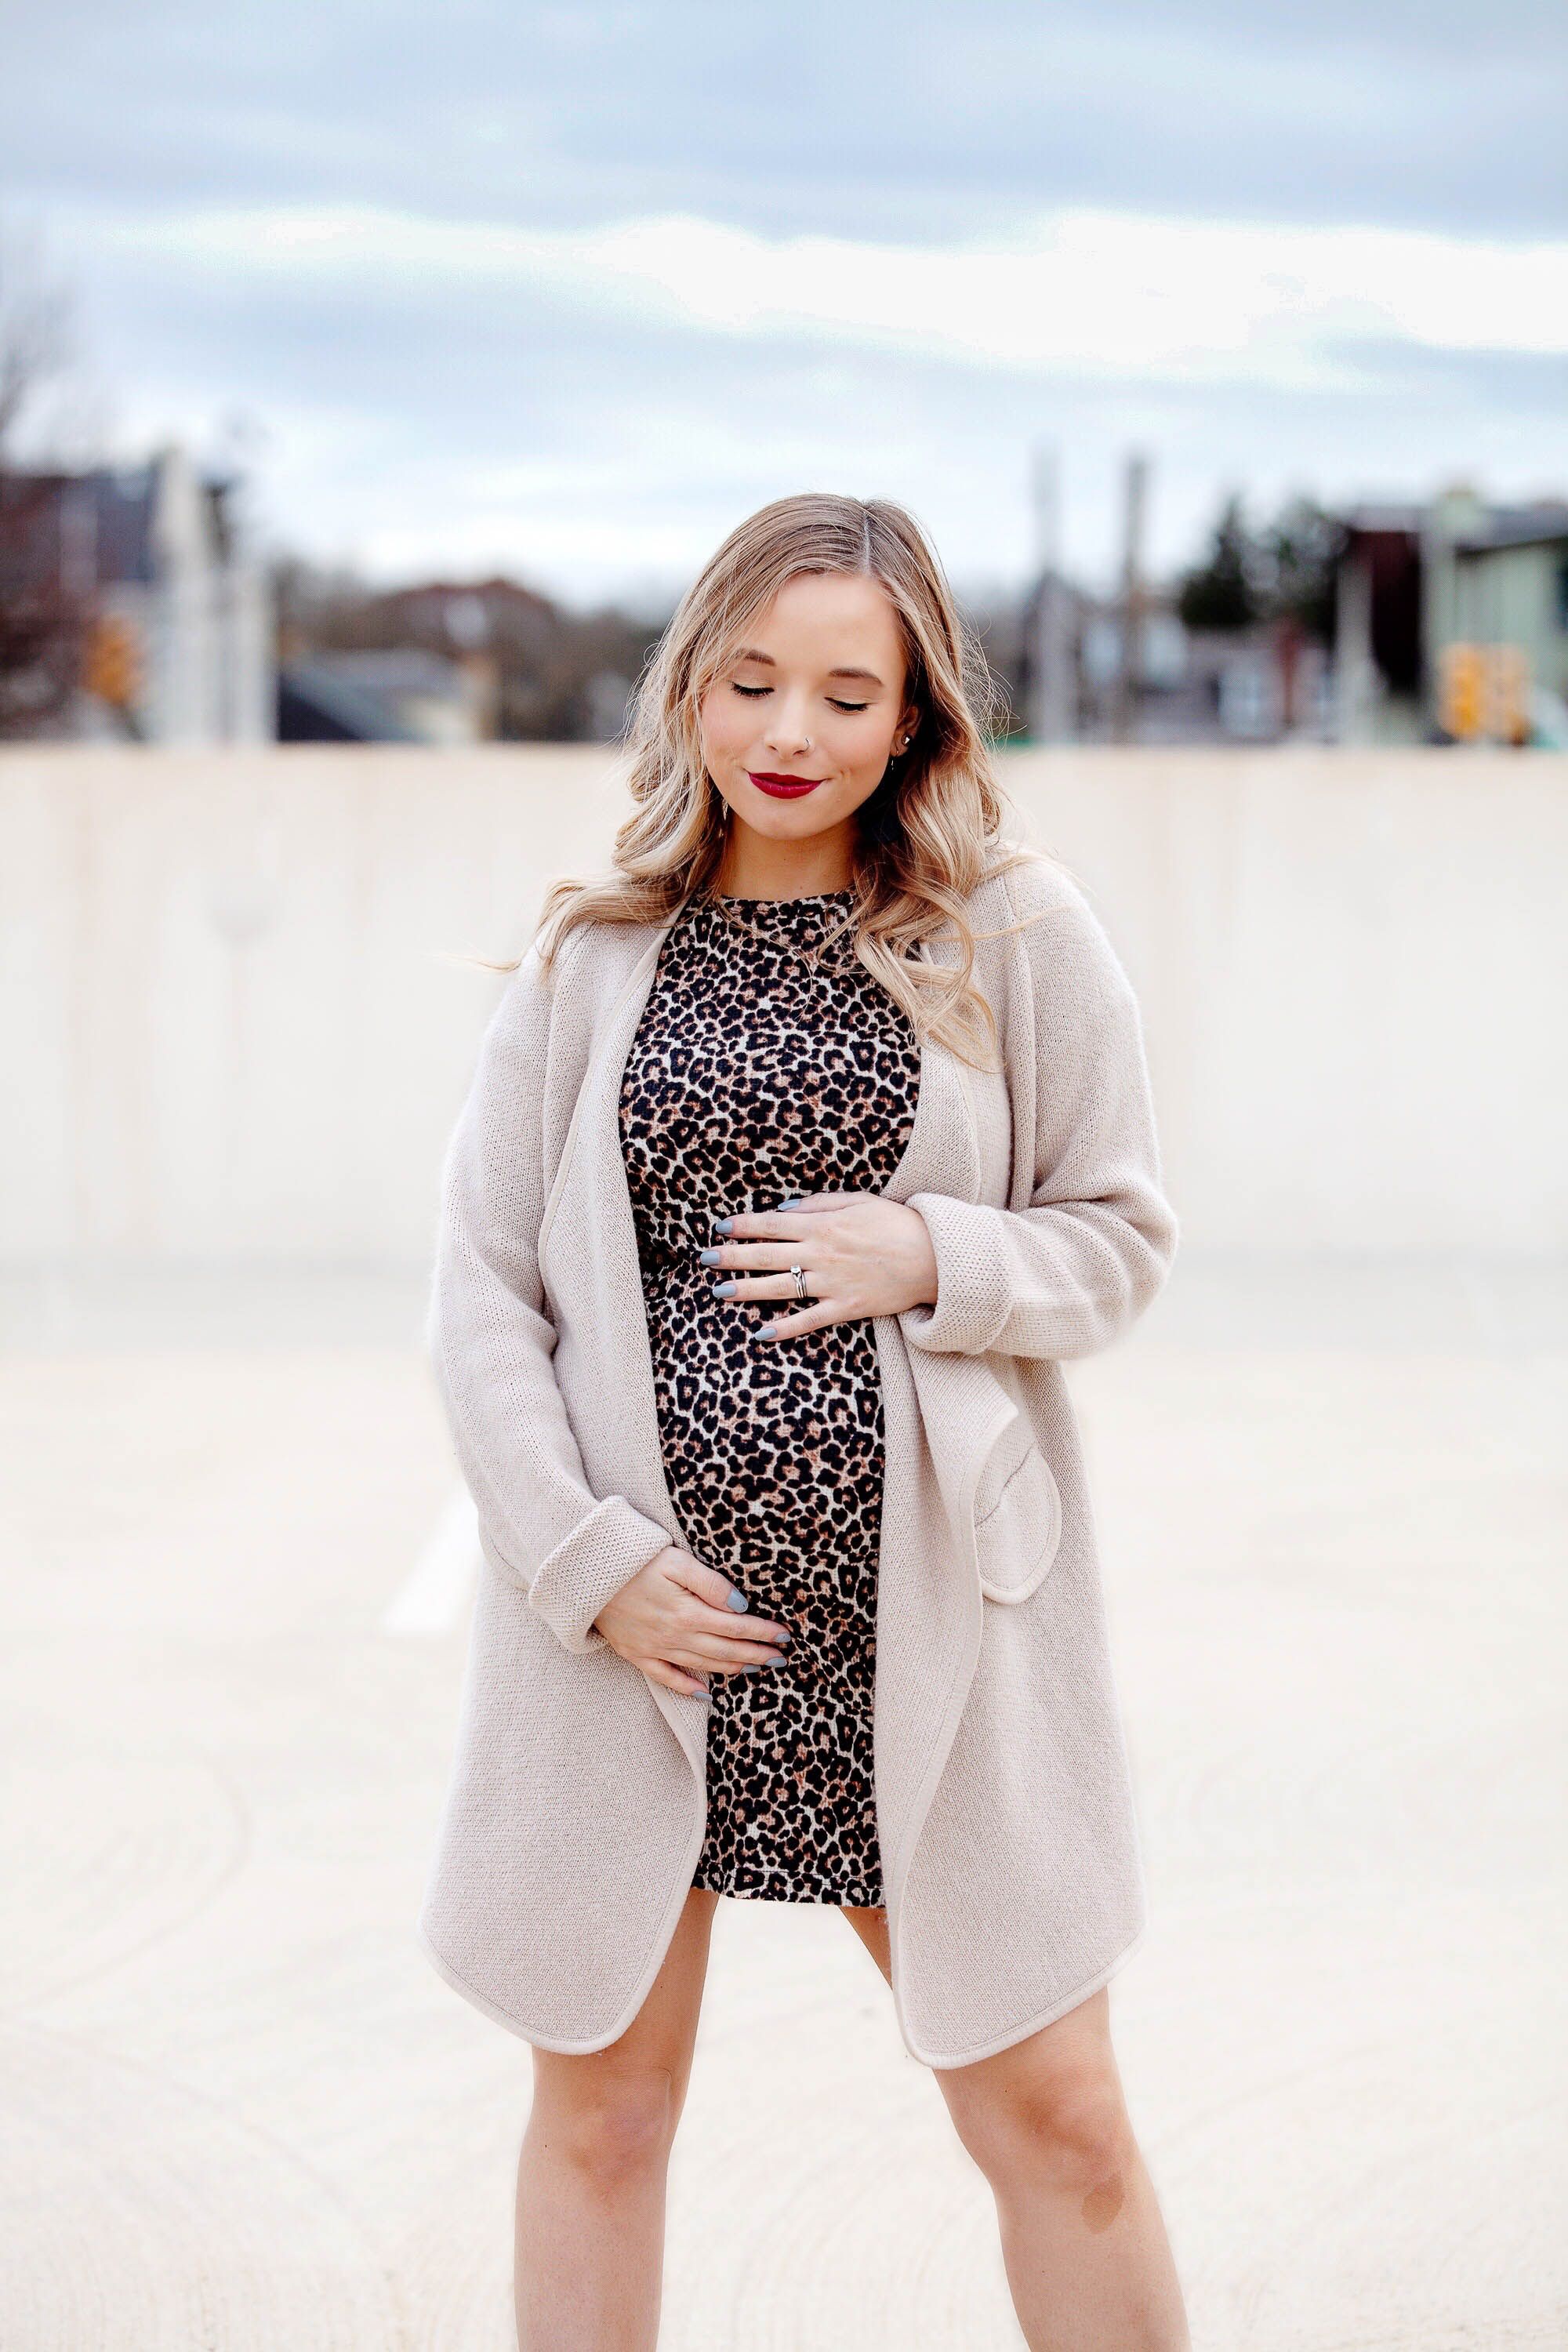 5 Flattering Maternity Looks for the Petite Mommy-to-Be